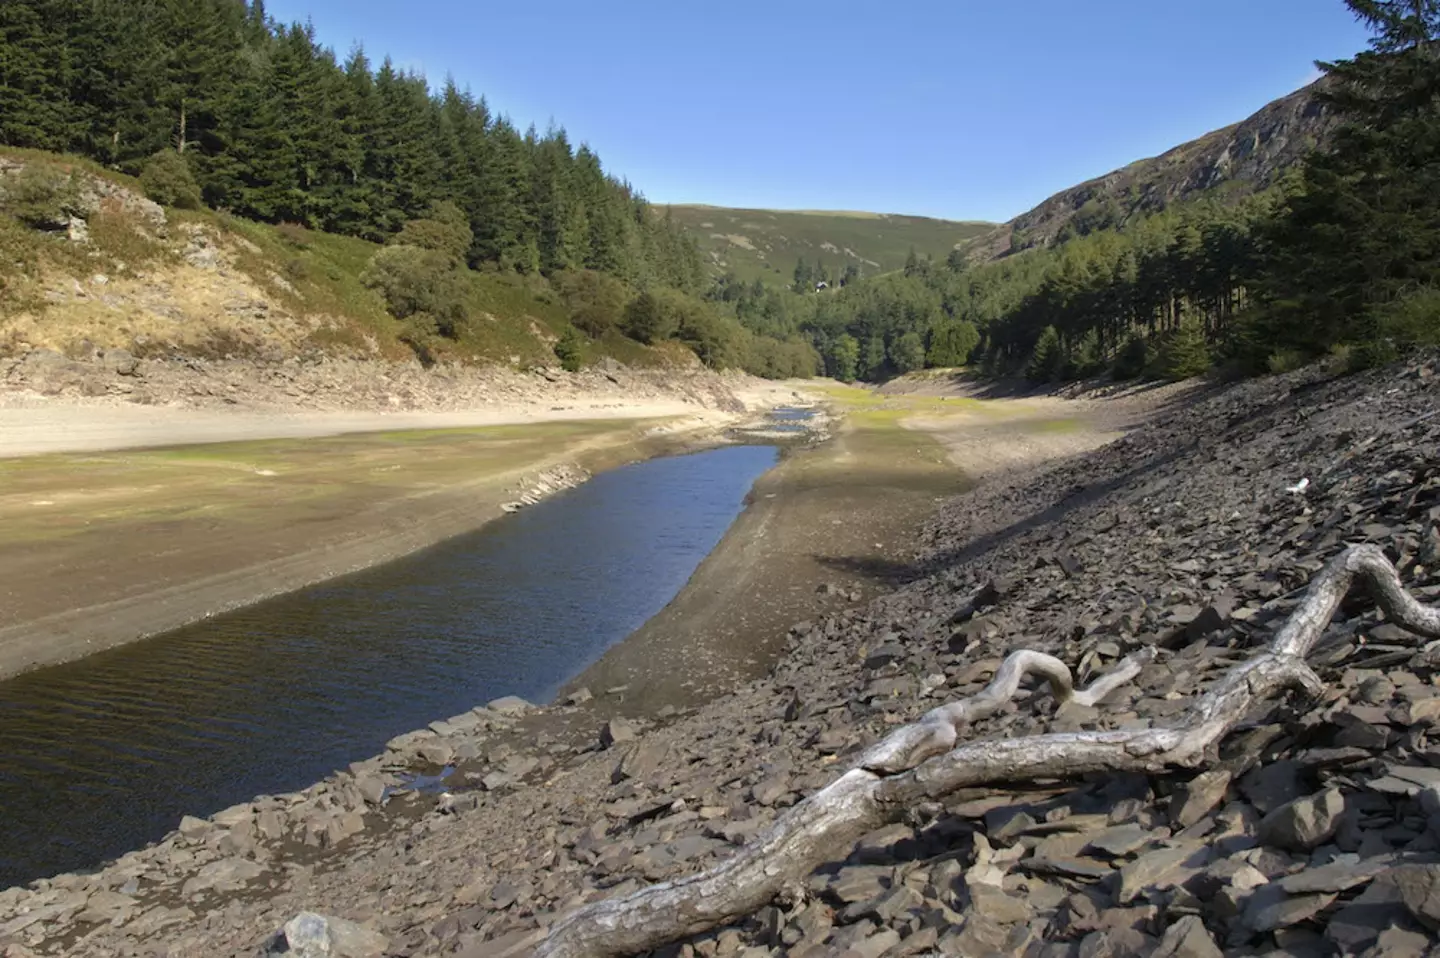 A lack of rainfall has led to the depletion of water resources in parts of the UK.